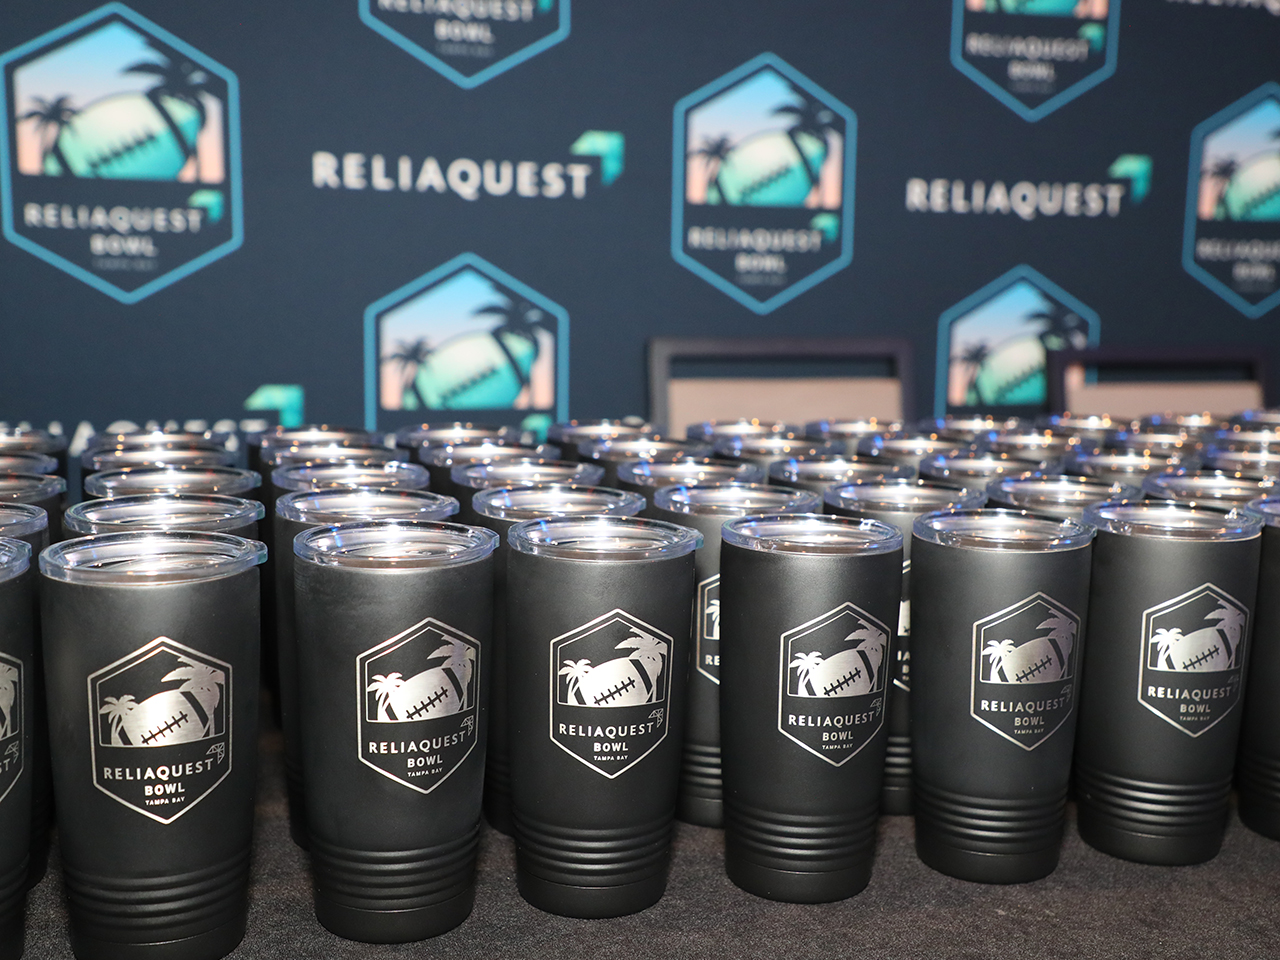 The new ReliaQuest Bowl logo was on display everywhere including souvenir thermos' for the attendees